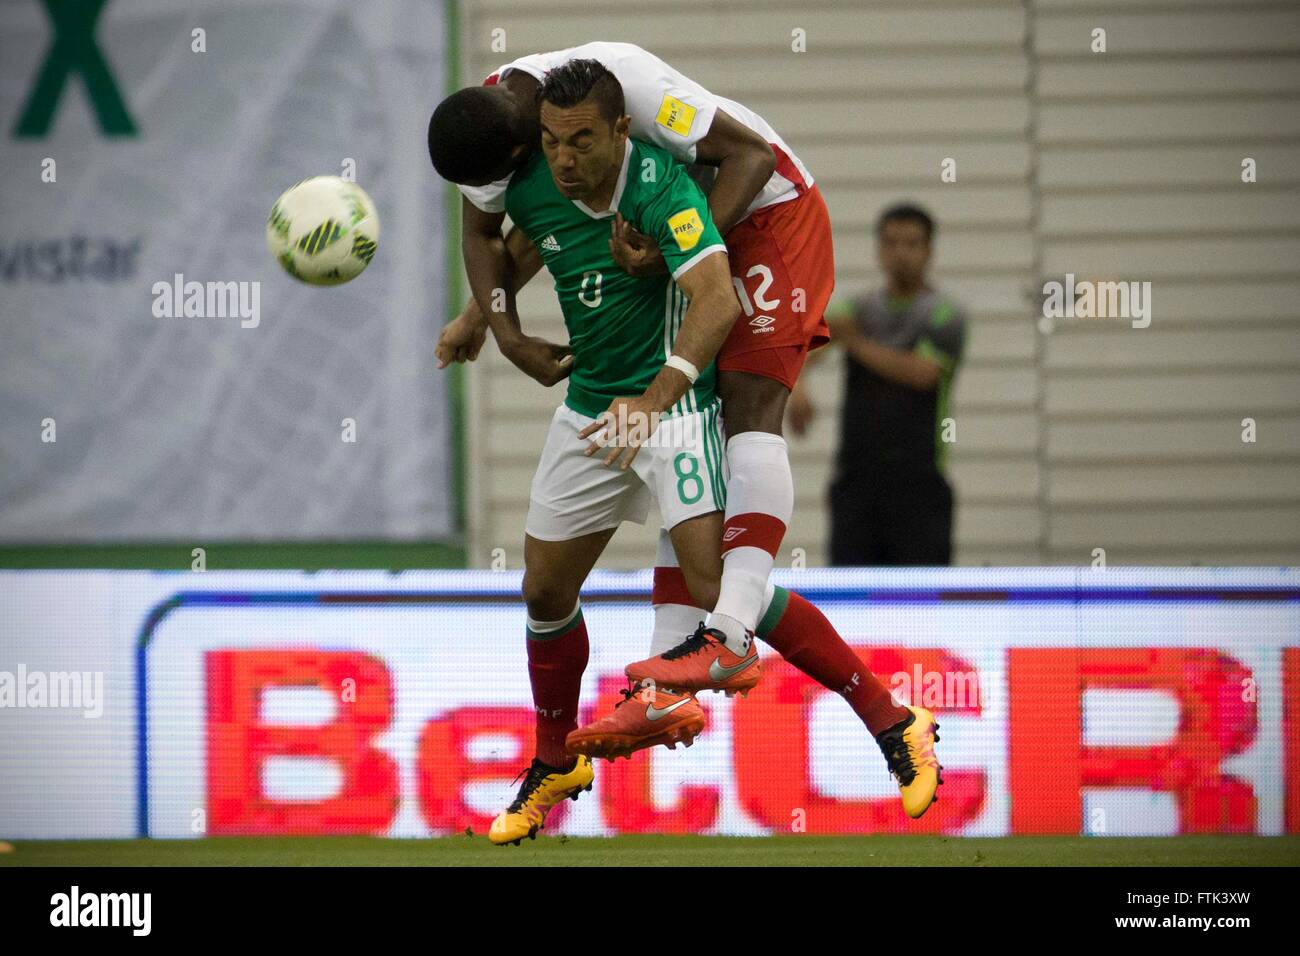 Ciudad De Mexico, Mexico. 29th Mar, 2016. Mexico's Marco Fabian (Front) vies with Canada's Doneil Henry during their qualifying match for 2018 Russia World Cup at Azteca Stadium in Mexico City, capital of Mexico, on March 29, 2016. Mexico won 2-0. © Alejandro Ayala/Xinhua/Alamy Live News Stock Photo